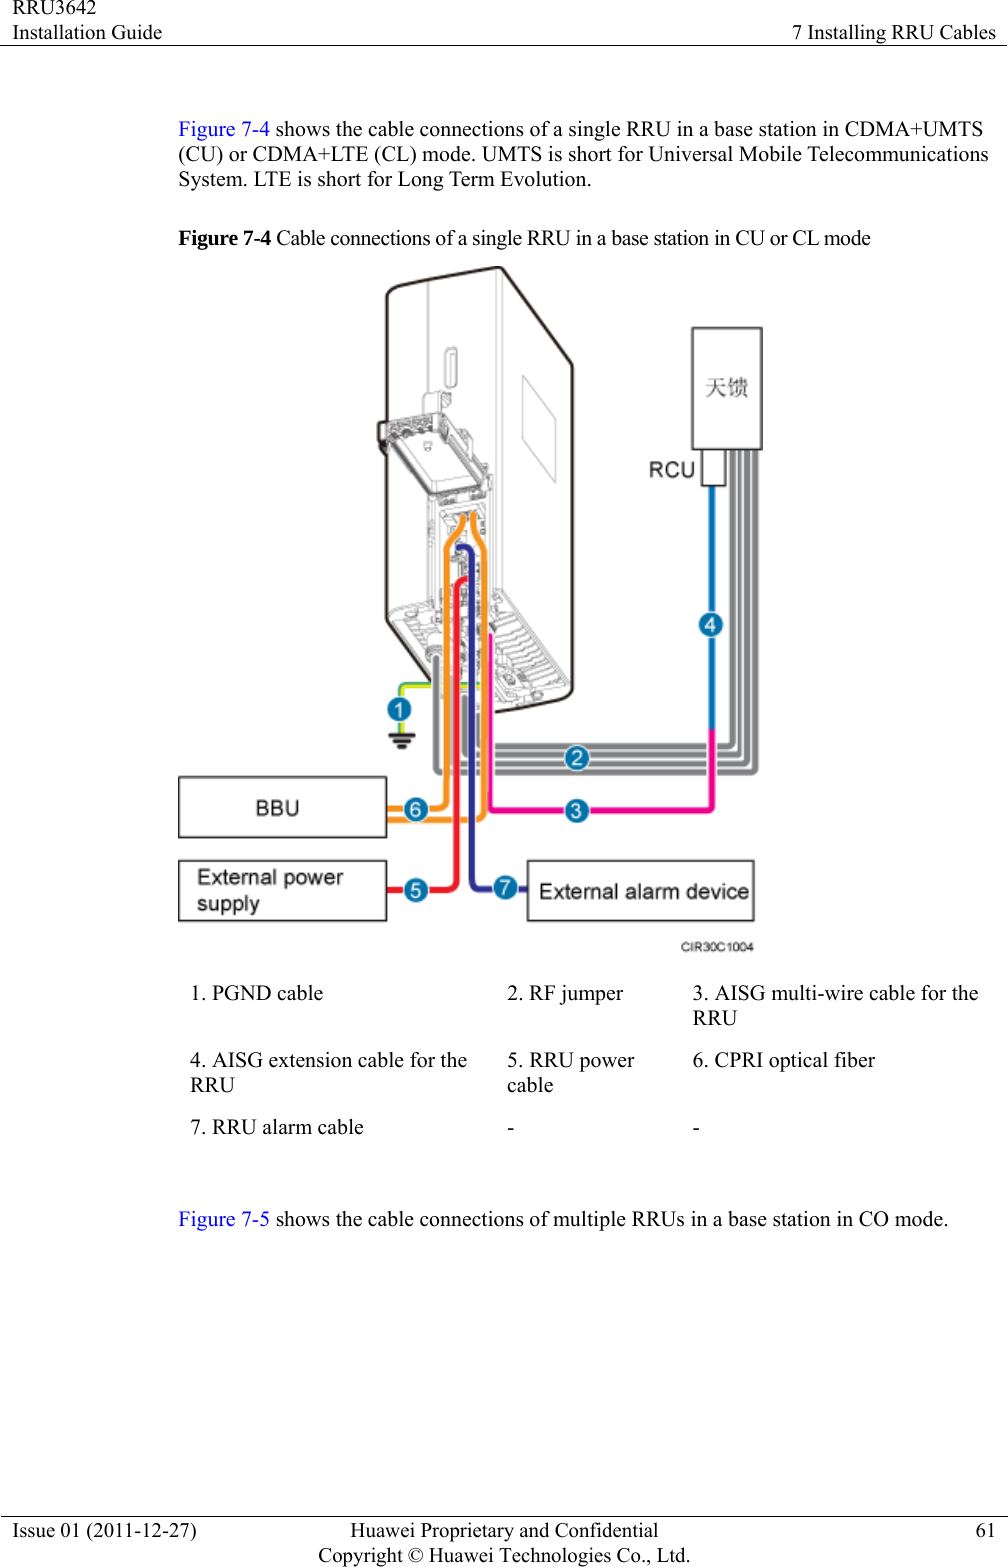 RRU3642 Installation Guide  7 Installing RRU Cables Issue 01 (2011-12-27)  Huawei Proprietary and Confidential         Copyright © Huawei Technologies Co., Ltd.61  Figure 7-4 shows the cable connections of a single RRU in a base station in CDMA+UMTS (CU) or CDMA+LTE (CL) mode. UMTS is short for Universal Mobile Telecommunications System. LTE is short for Long Term Evolution.   Figure 7-4 Cable connections of a single RRU in a base station in CU or CL mode  1. PGND cable  2. RF jumper  3. AISG multi-wire cable for the RRU 4. AISG extension cable for the RRU 5. RRU power cable 6. CPRI optical fiber 7. RRU alarm cable  -  -  Figure 7-5 shows the cable connections of multiple RRUs in a base station in CO mode.   